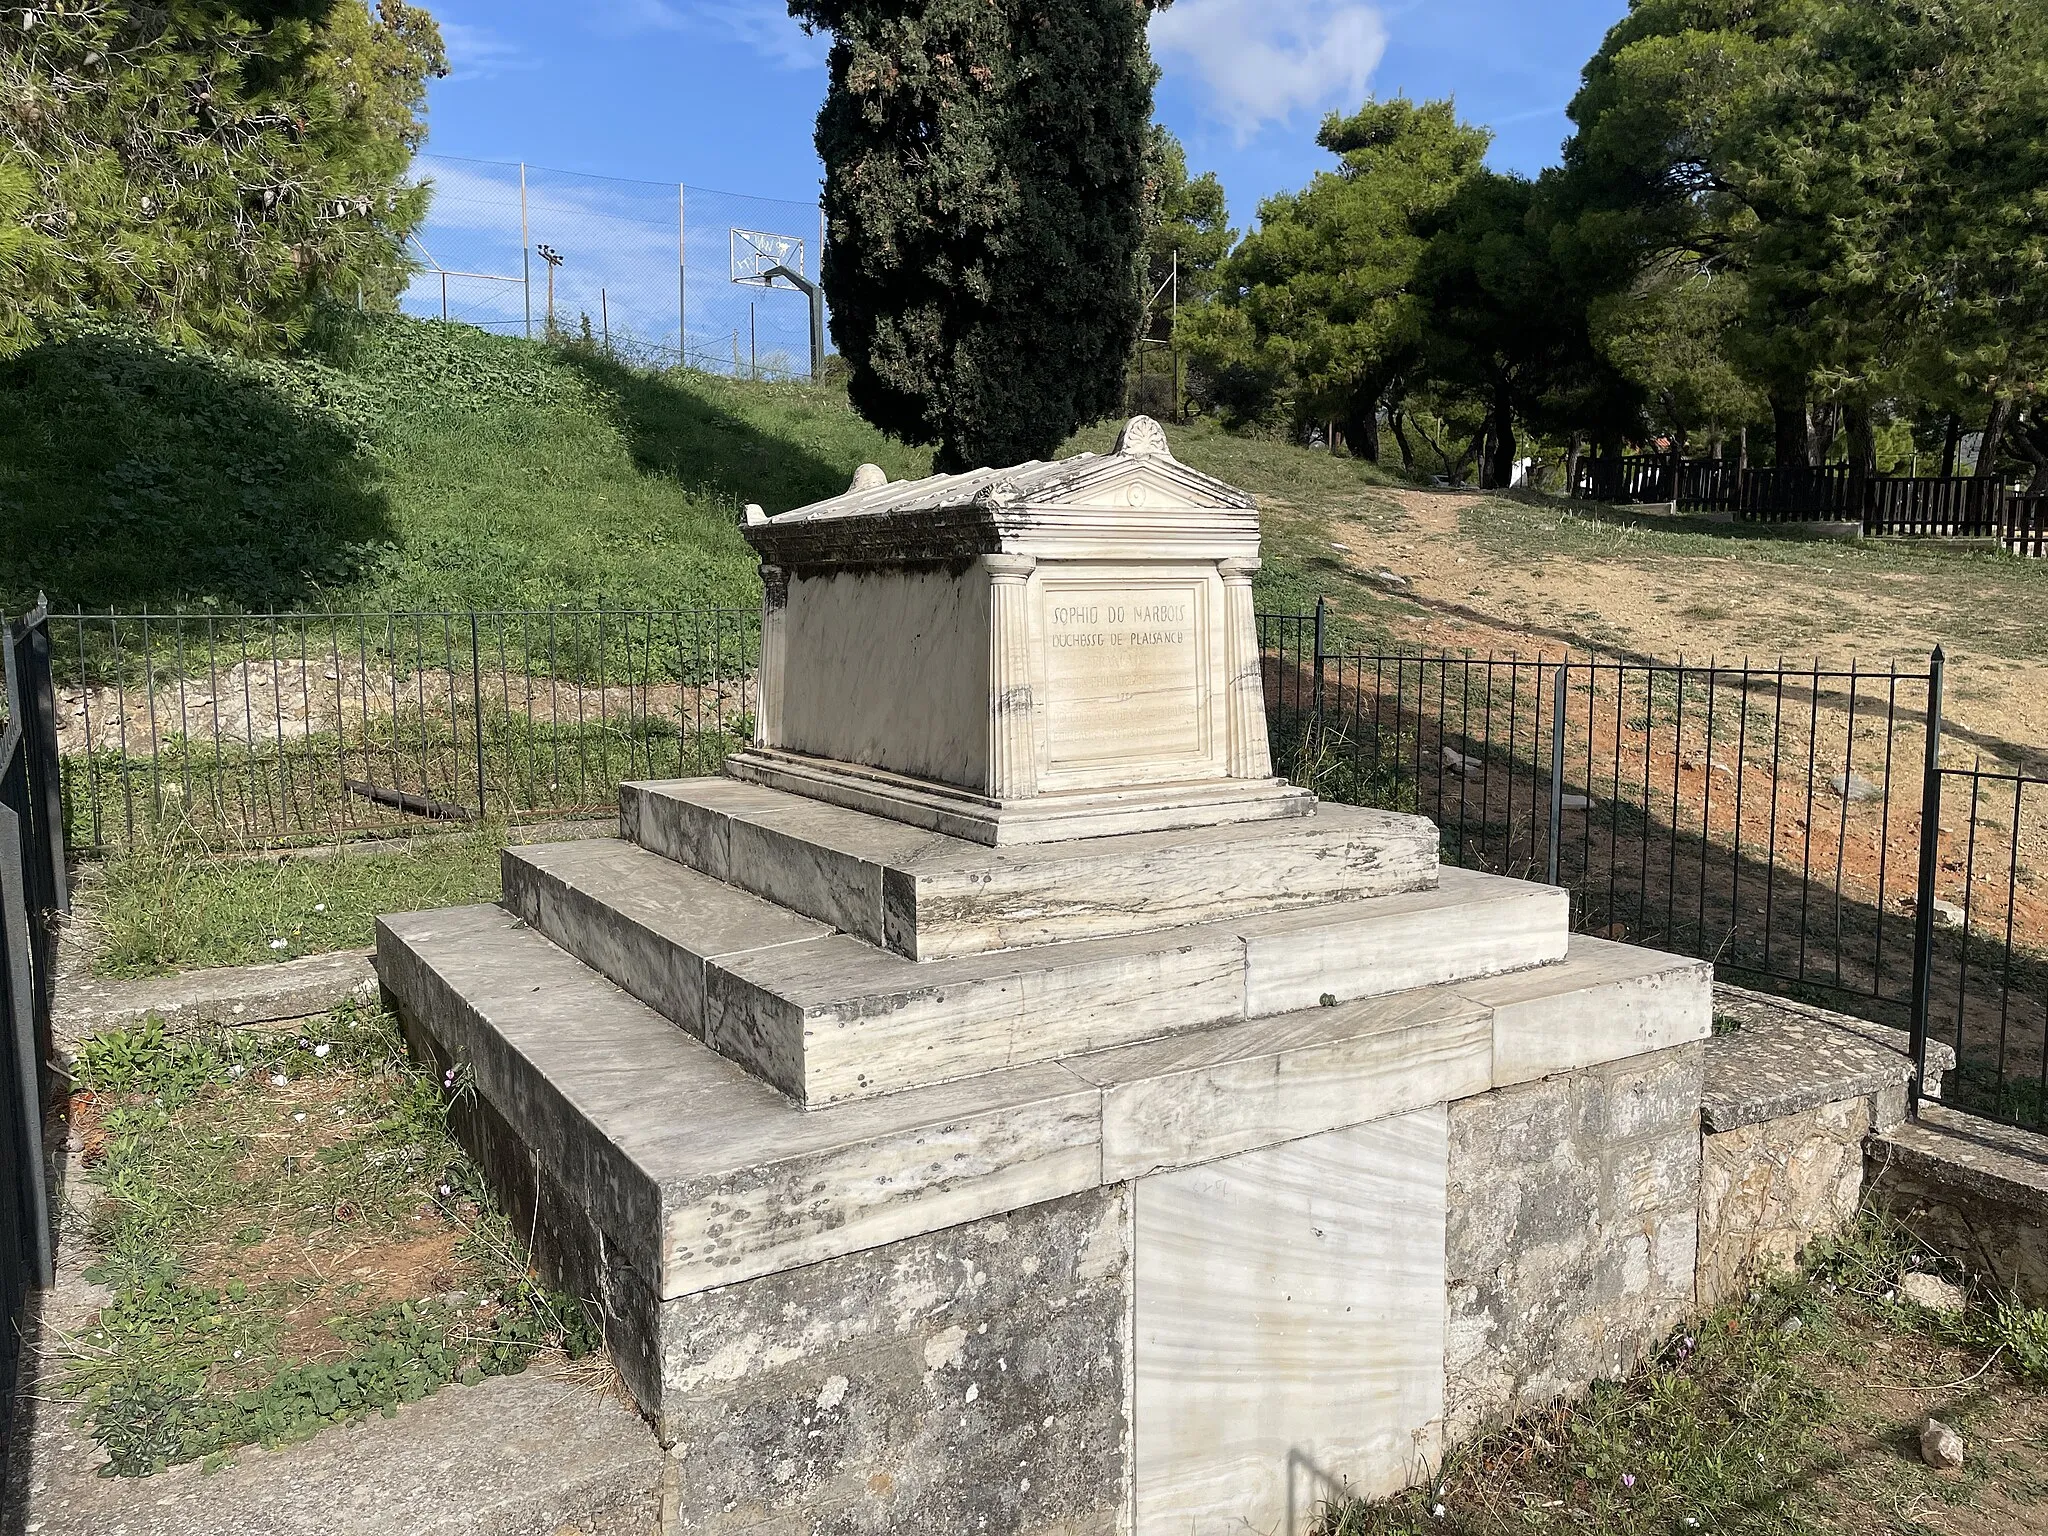 Photo showing: a roadside tomb in Pentelic marble honoring the Duchesse de Plaisance, whose villa was nearby. Erected after her death in 1854.